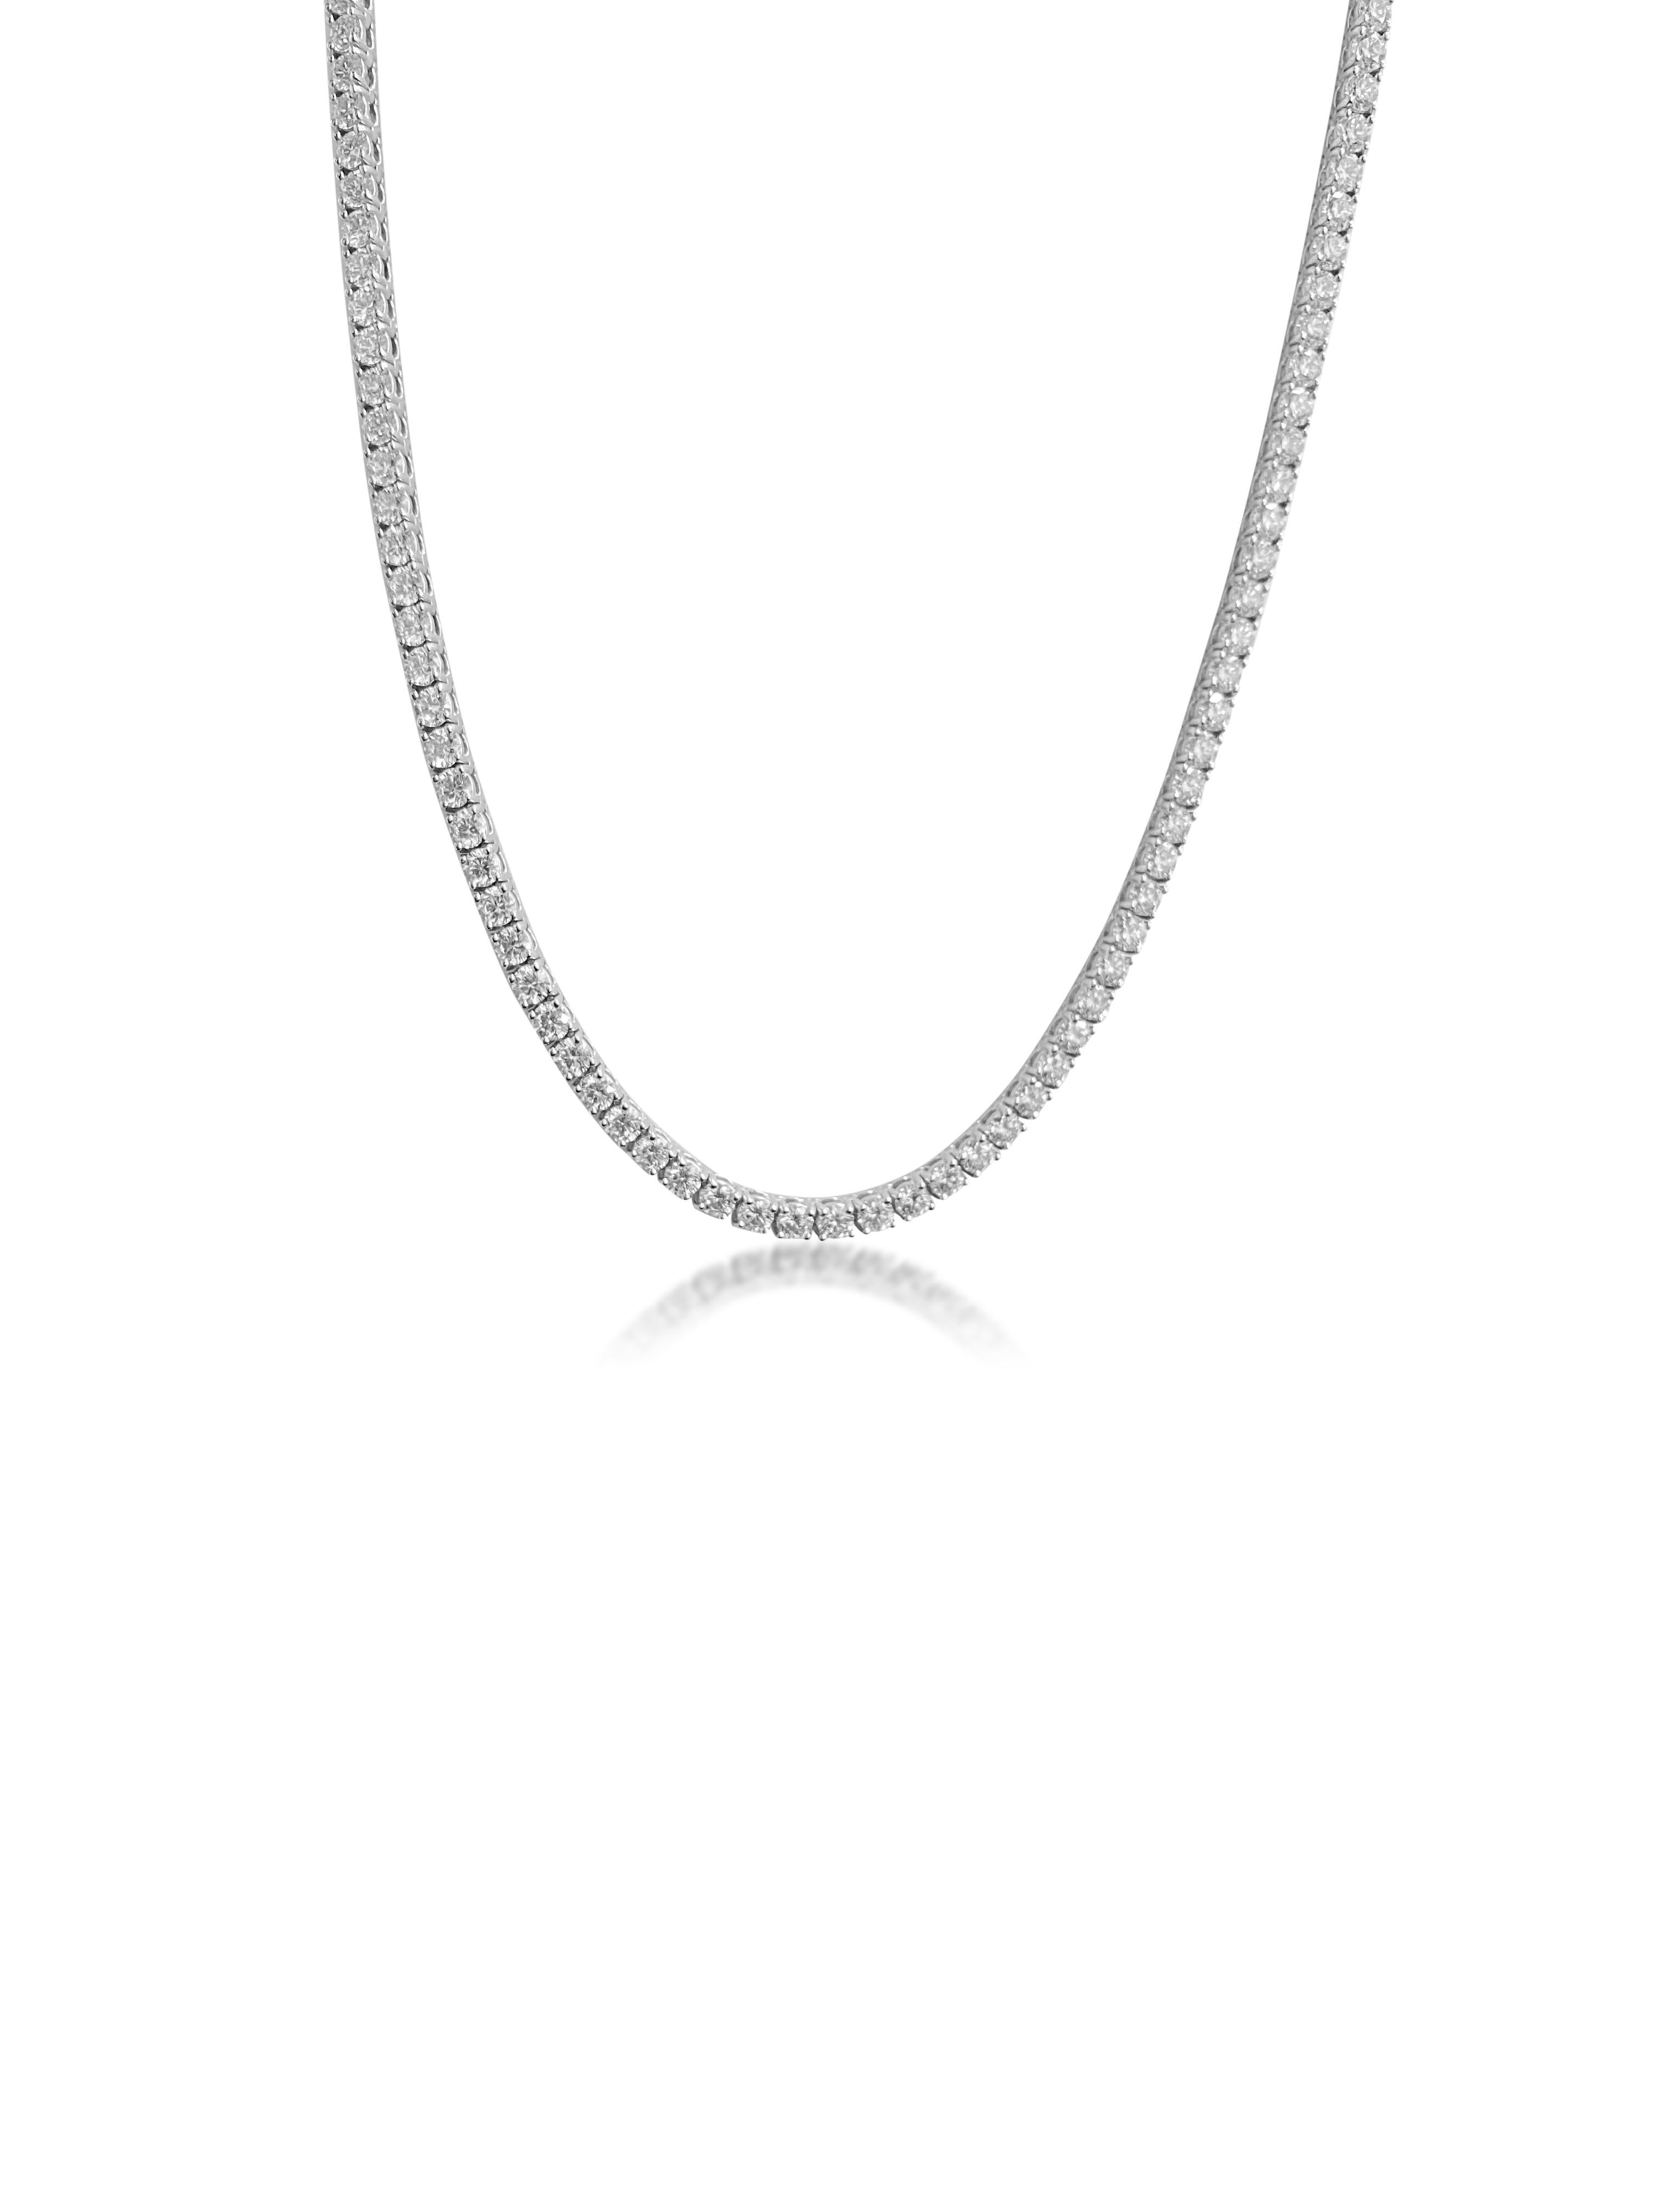 Fashioned from luxurious 14K white gold, this stunning necklace features 14.5 carats of round brilliant cut diamonds, showcasing VVS clarity and unparalleled brilliance. With a length of 17 inches, this exquisite piece exudes elegance and